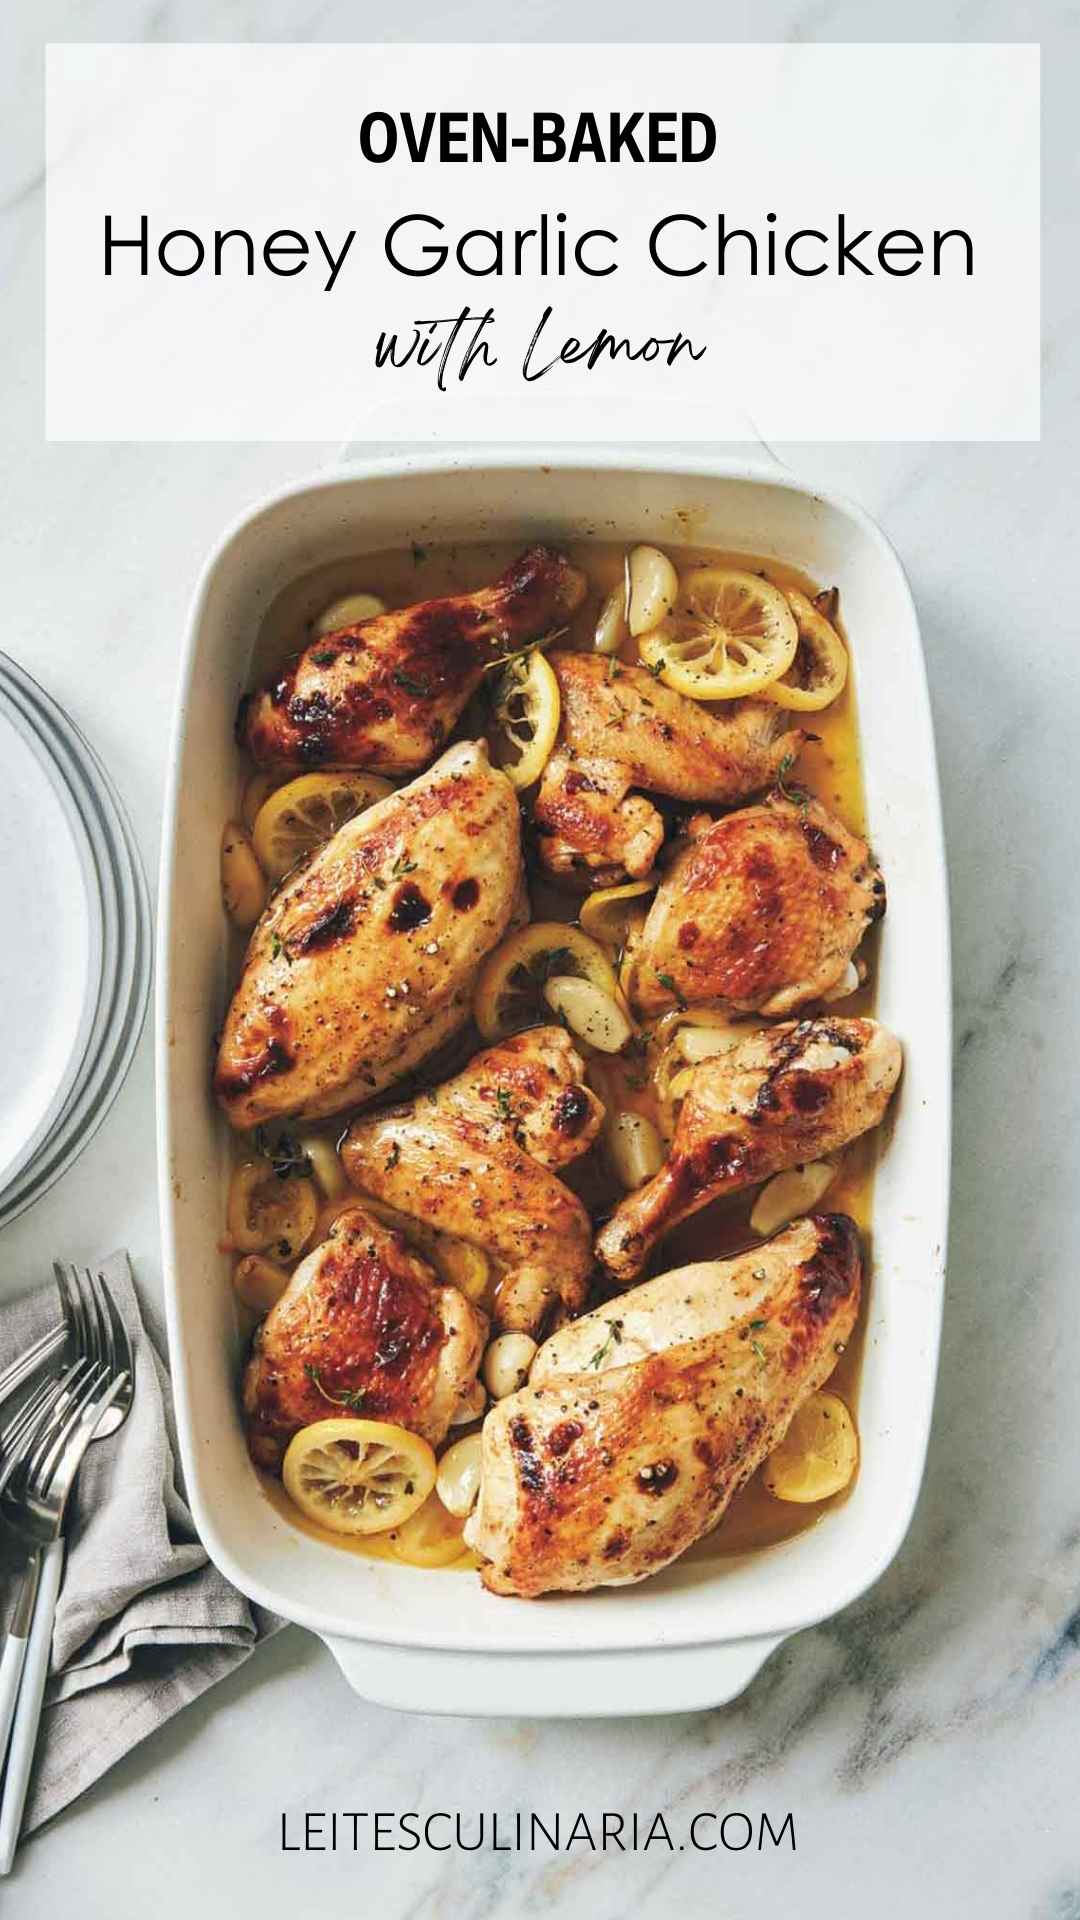 Pieces of honey glazed chicken in a white casserole diesh surrounded by lemon and garlic confit.